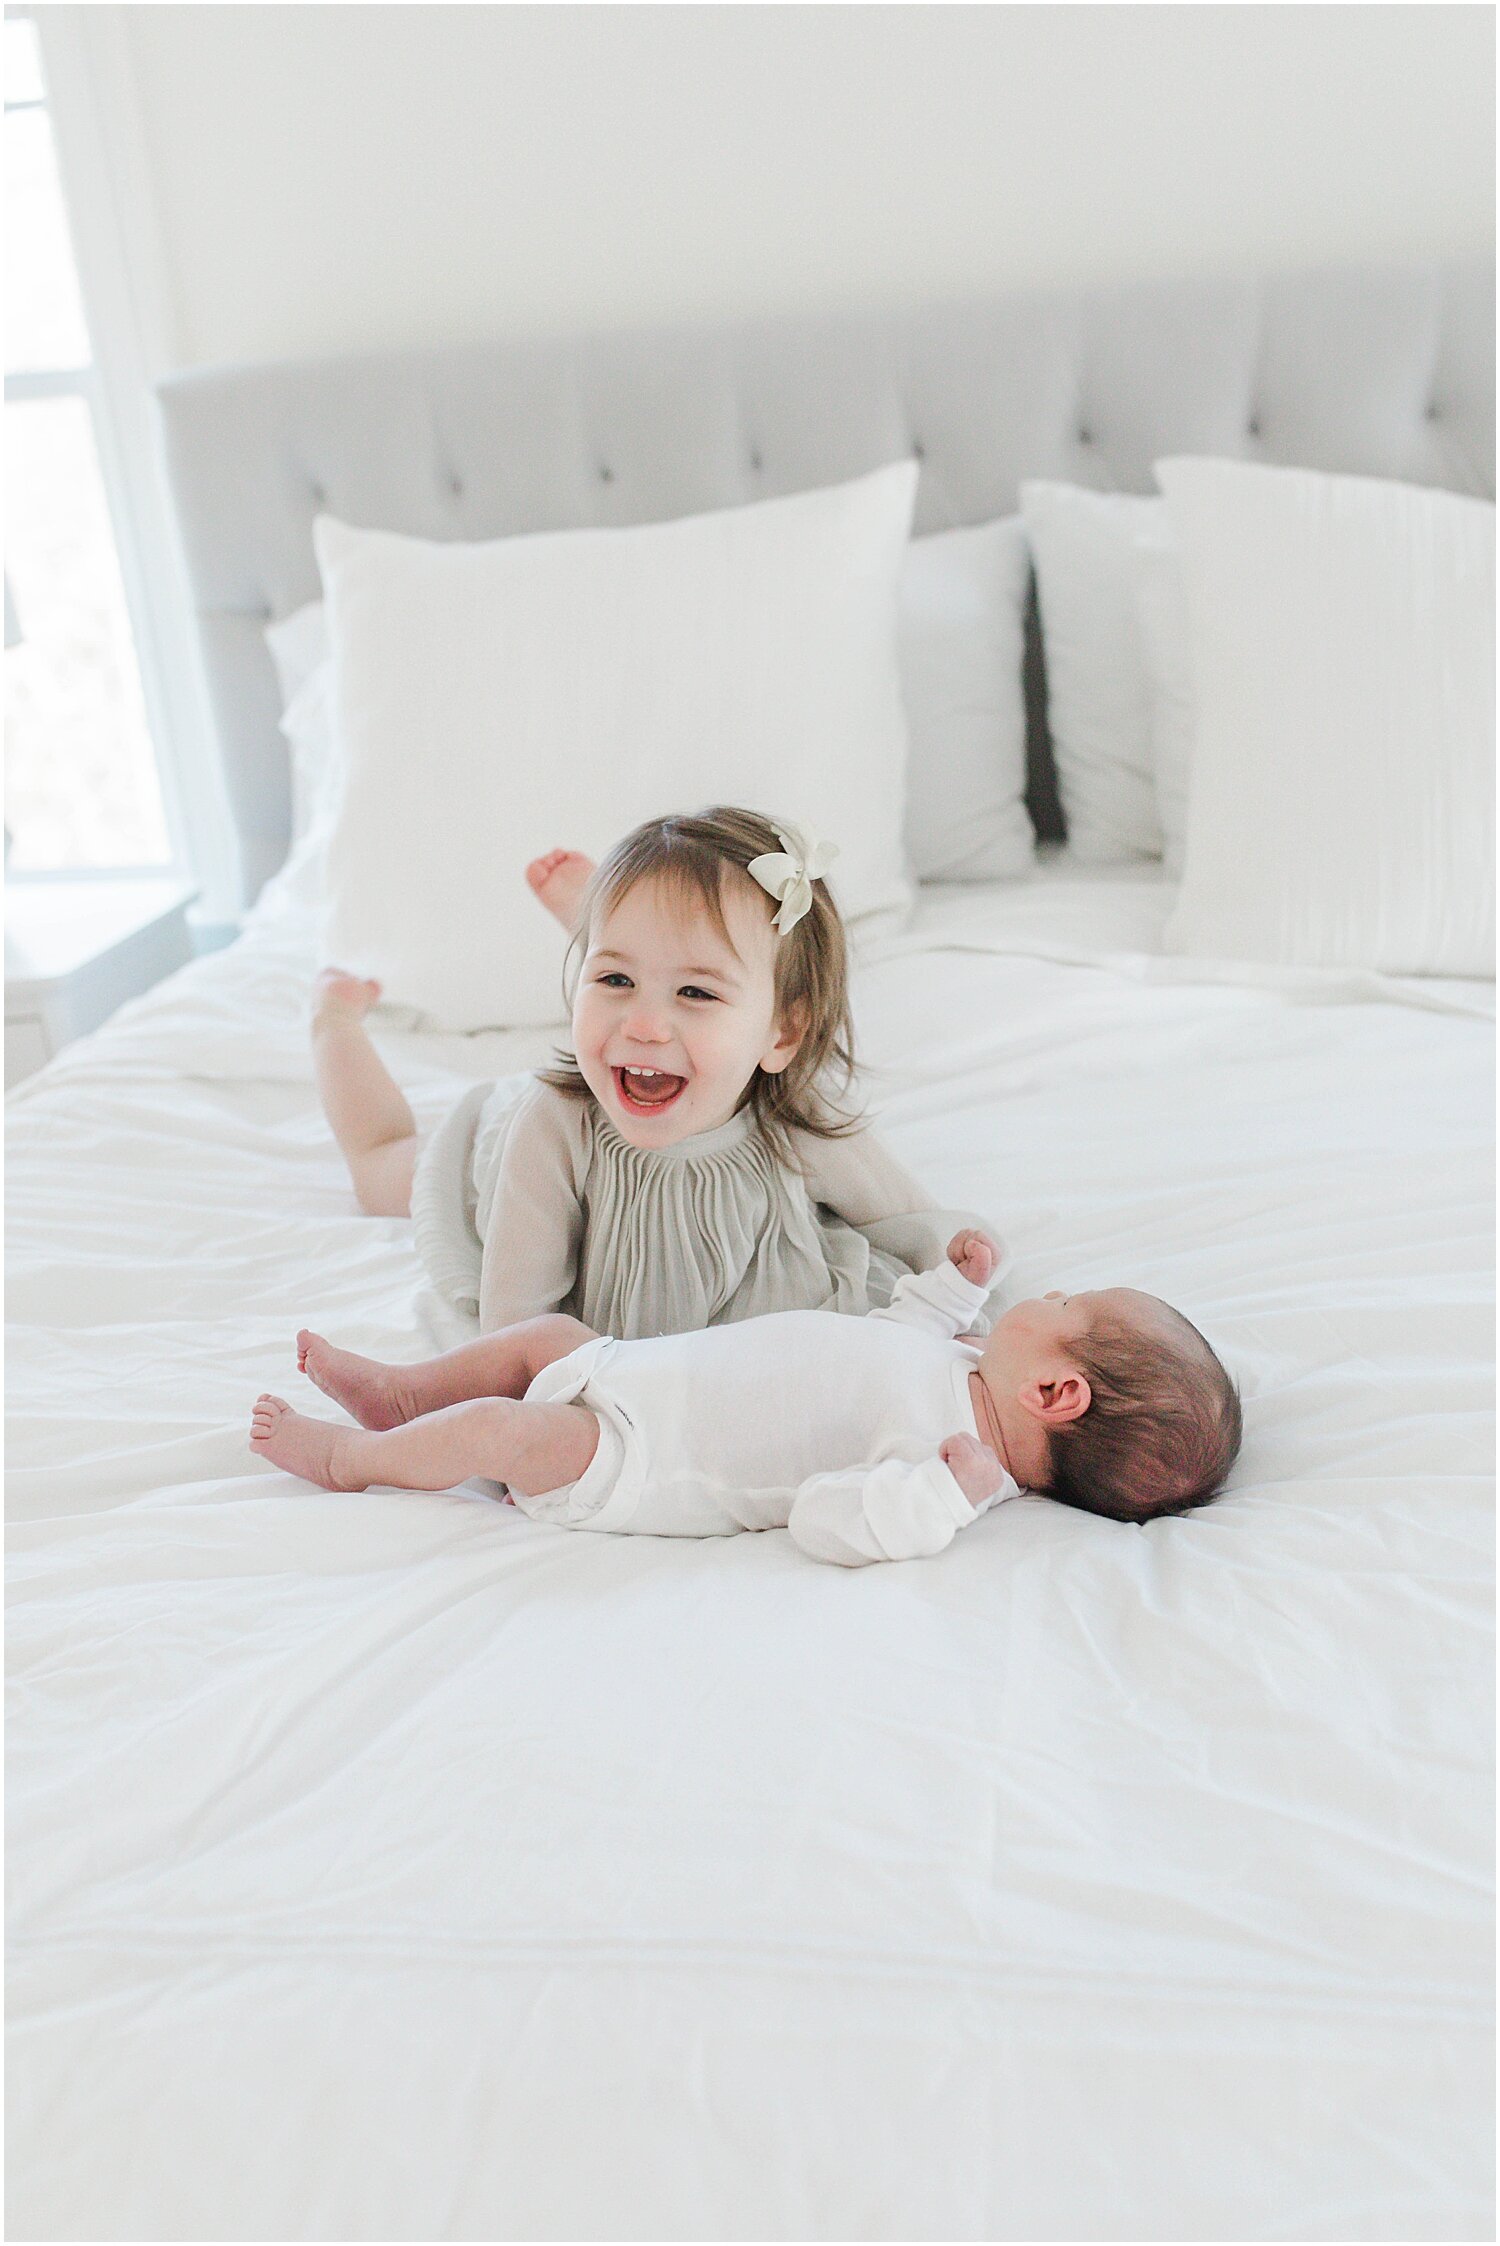 Big sister and baby brother during in-home newborn session. Photos by Westport Newborn Photographer, Kristin Wood Photography.